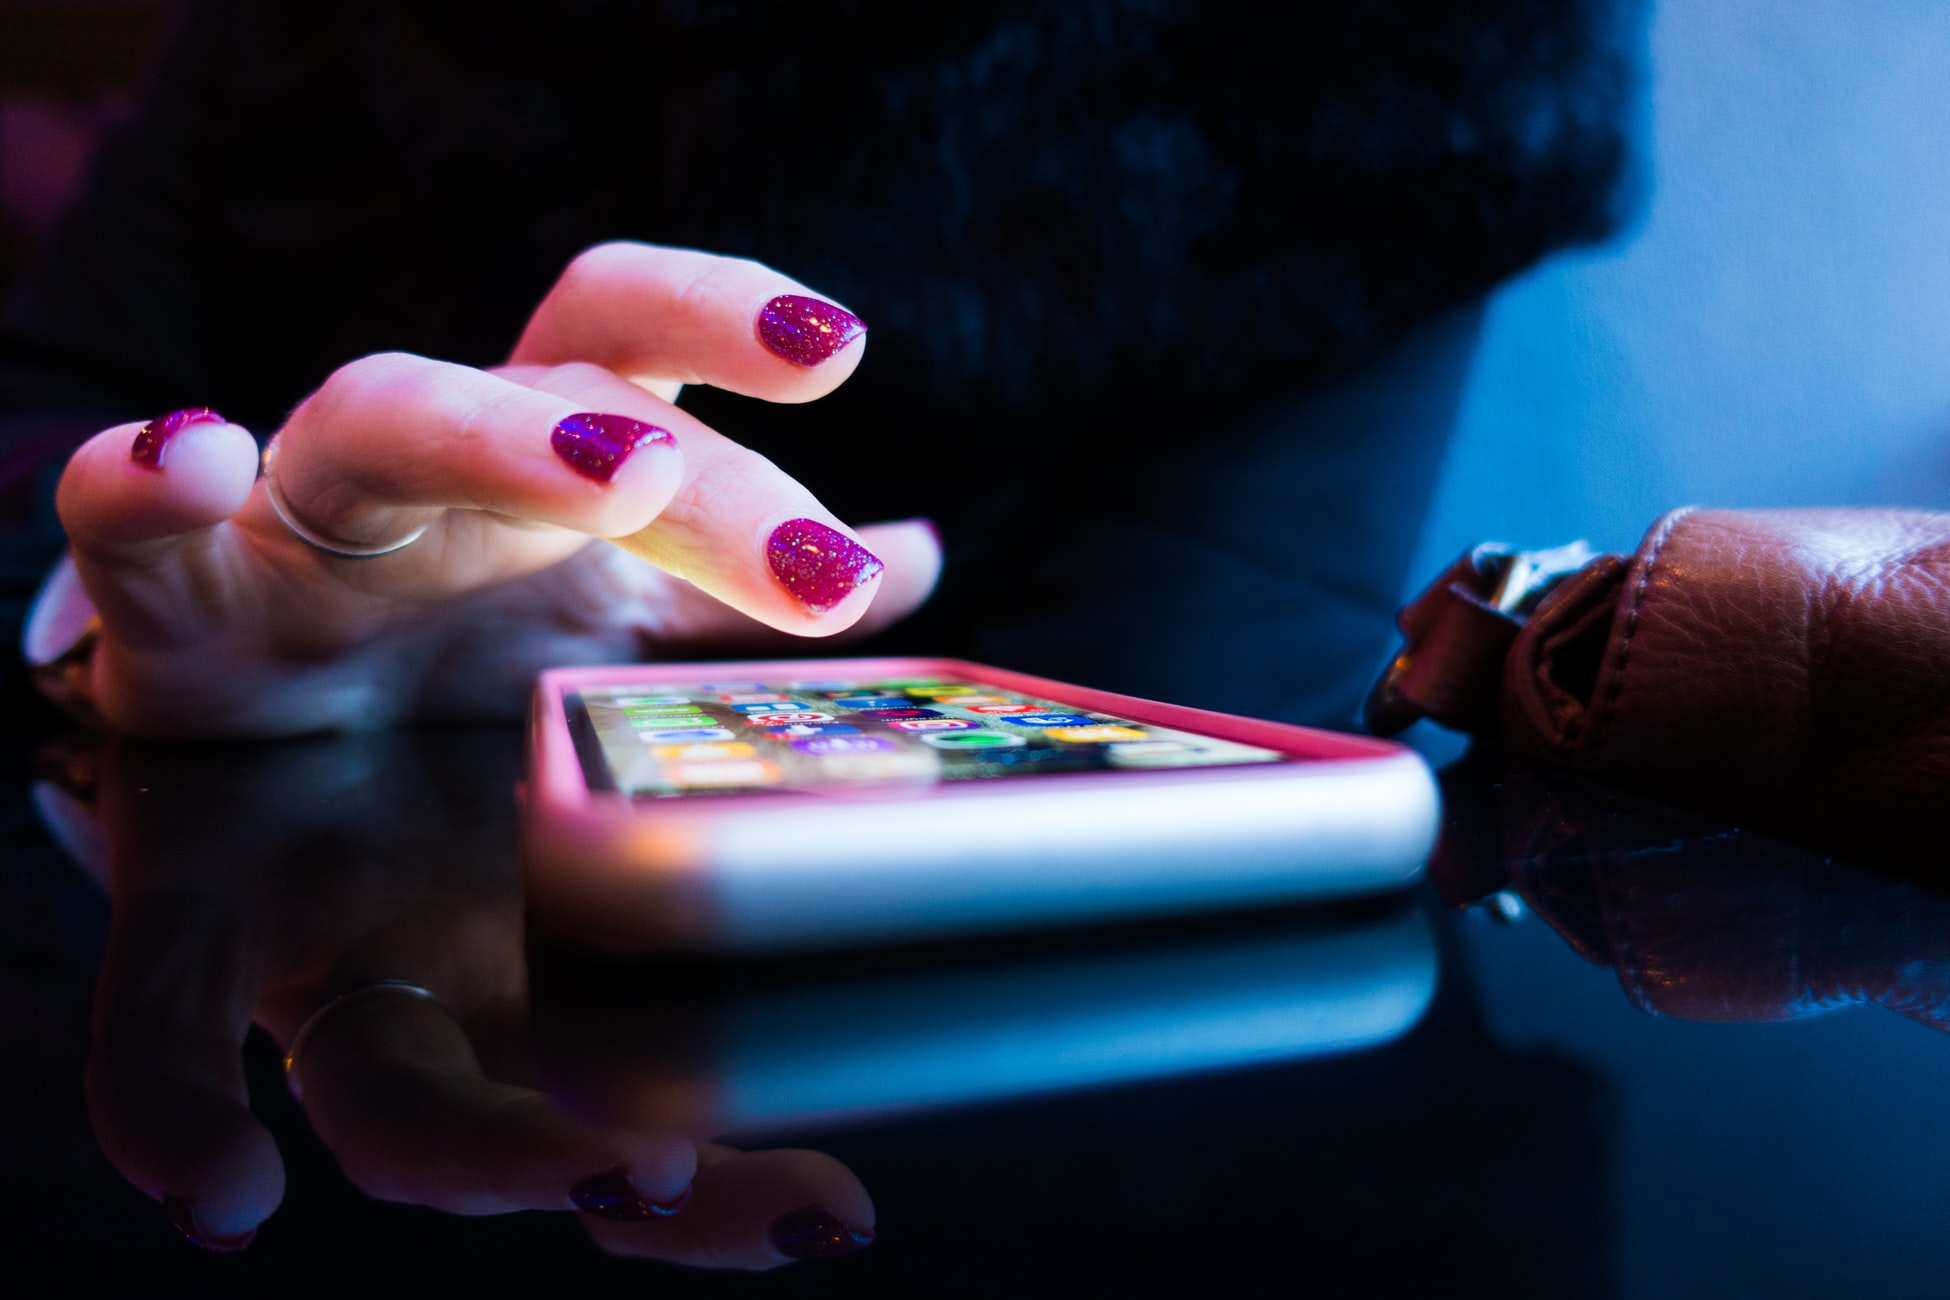 Womans hand poised over an iPhone with some apps showing. Her nails are decorated with glitter nail varnish.